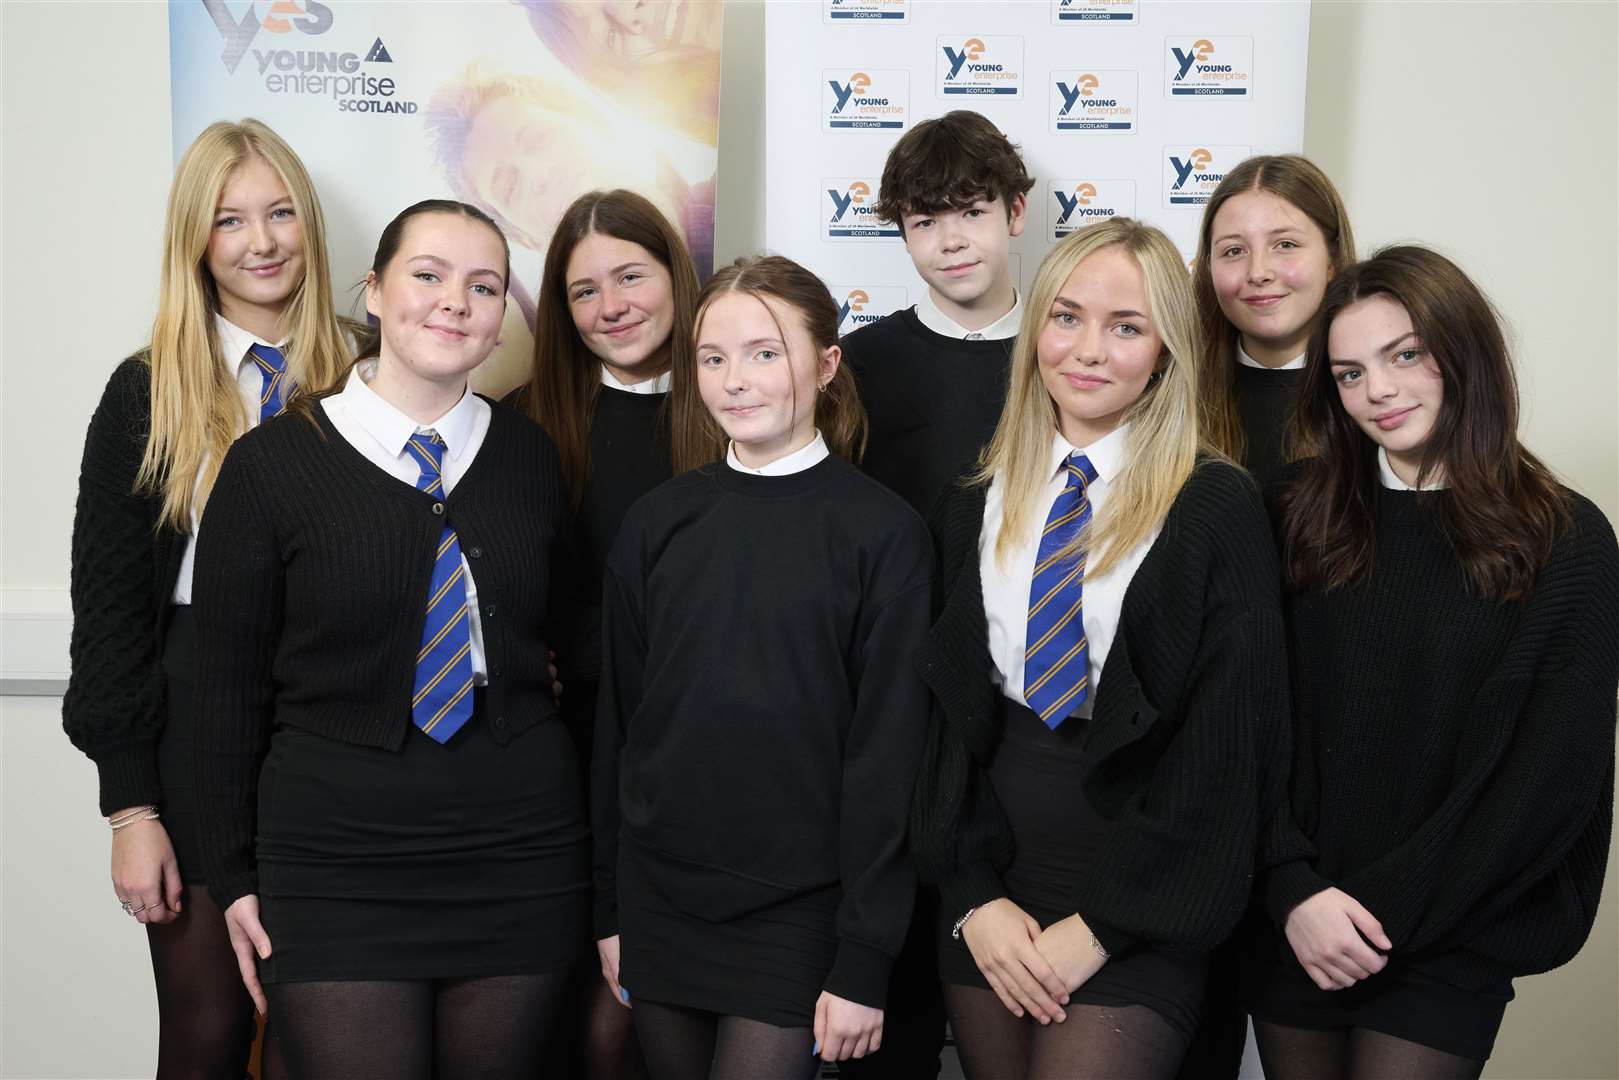 Lossiemouth High School's team that took part in the event.